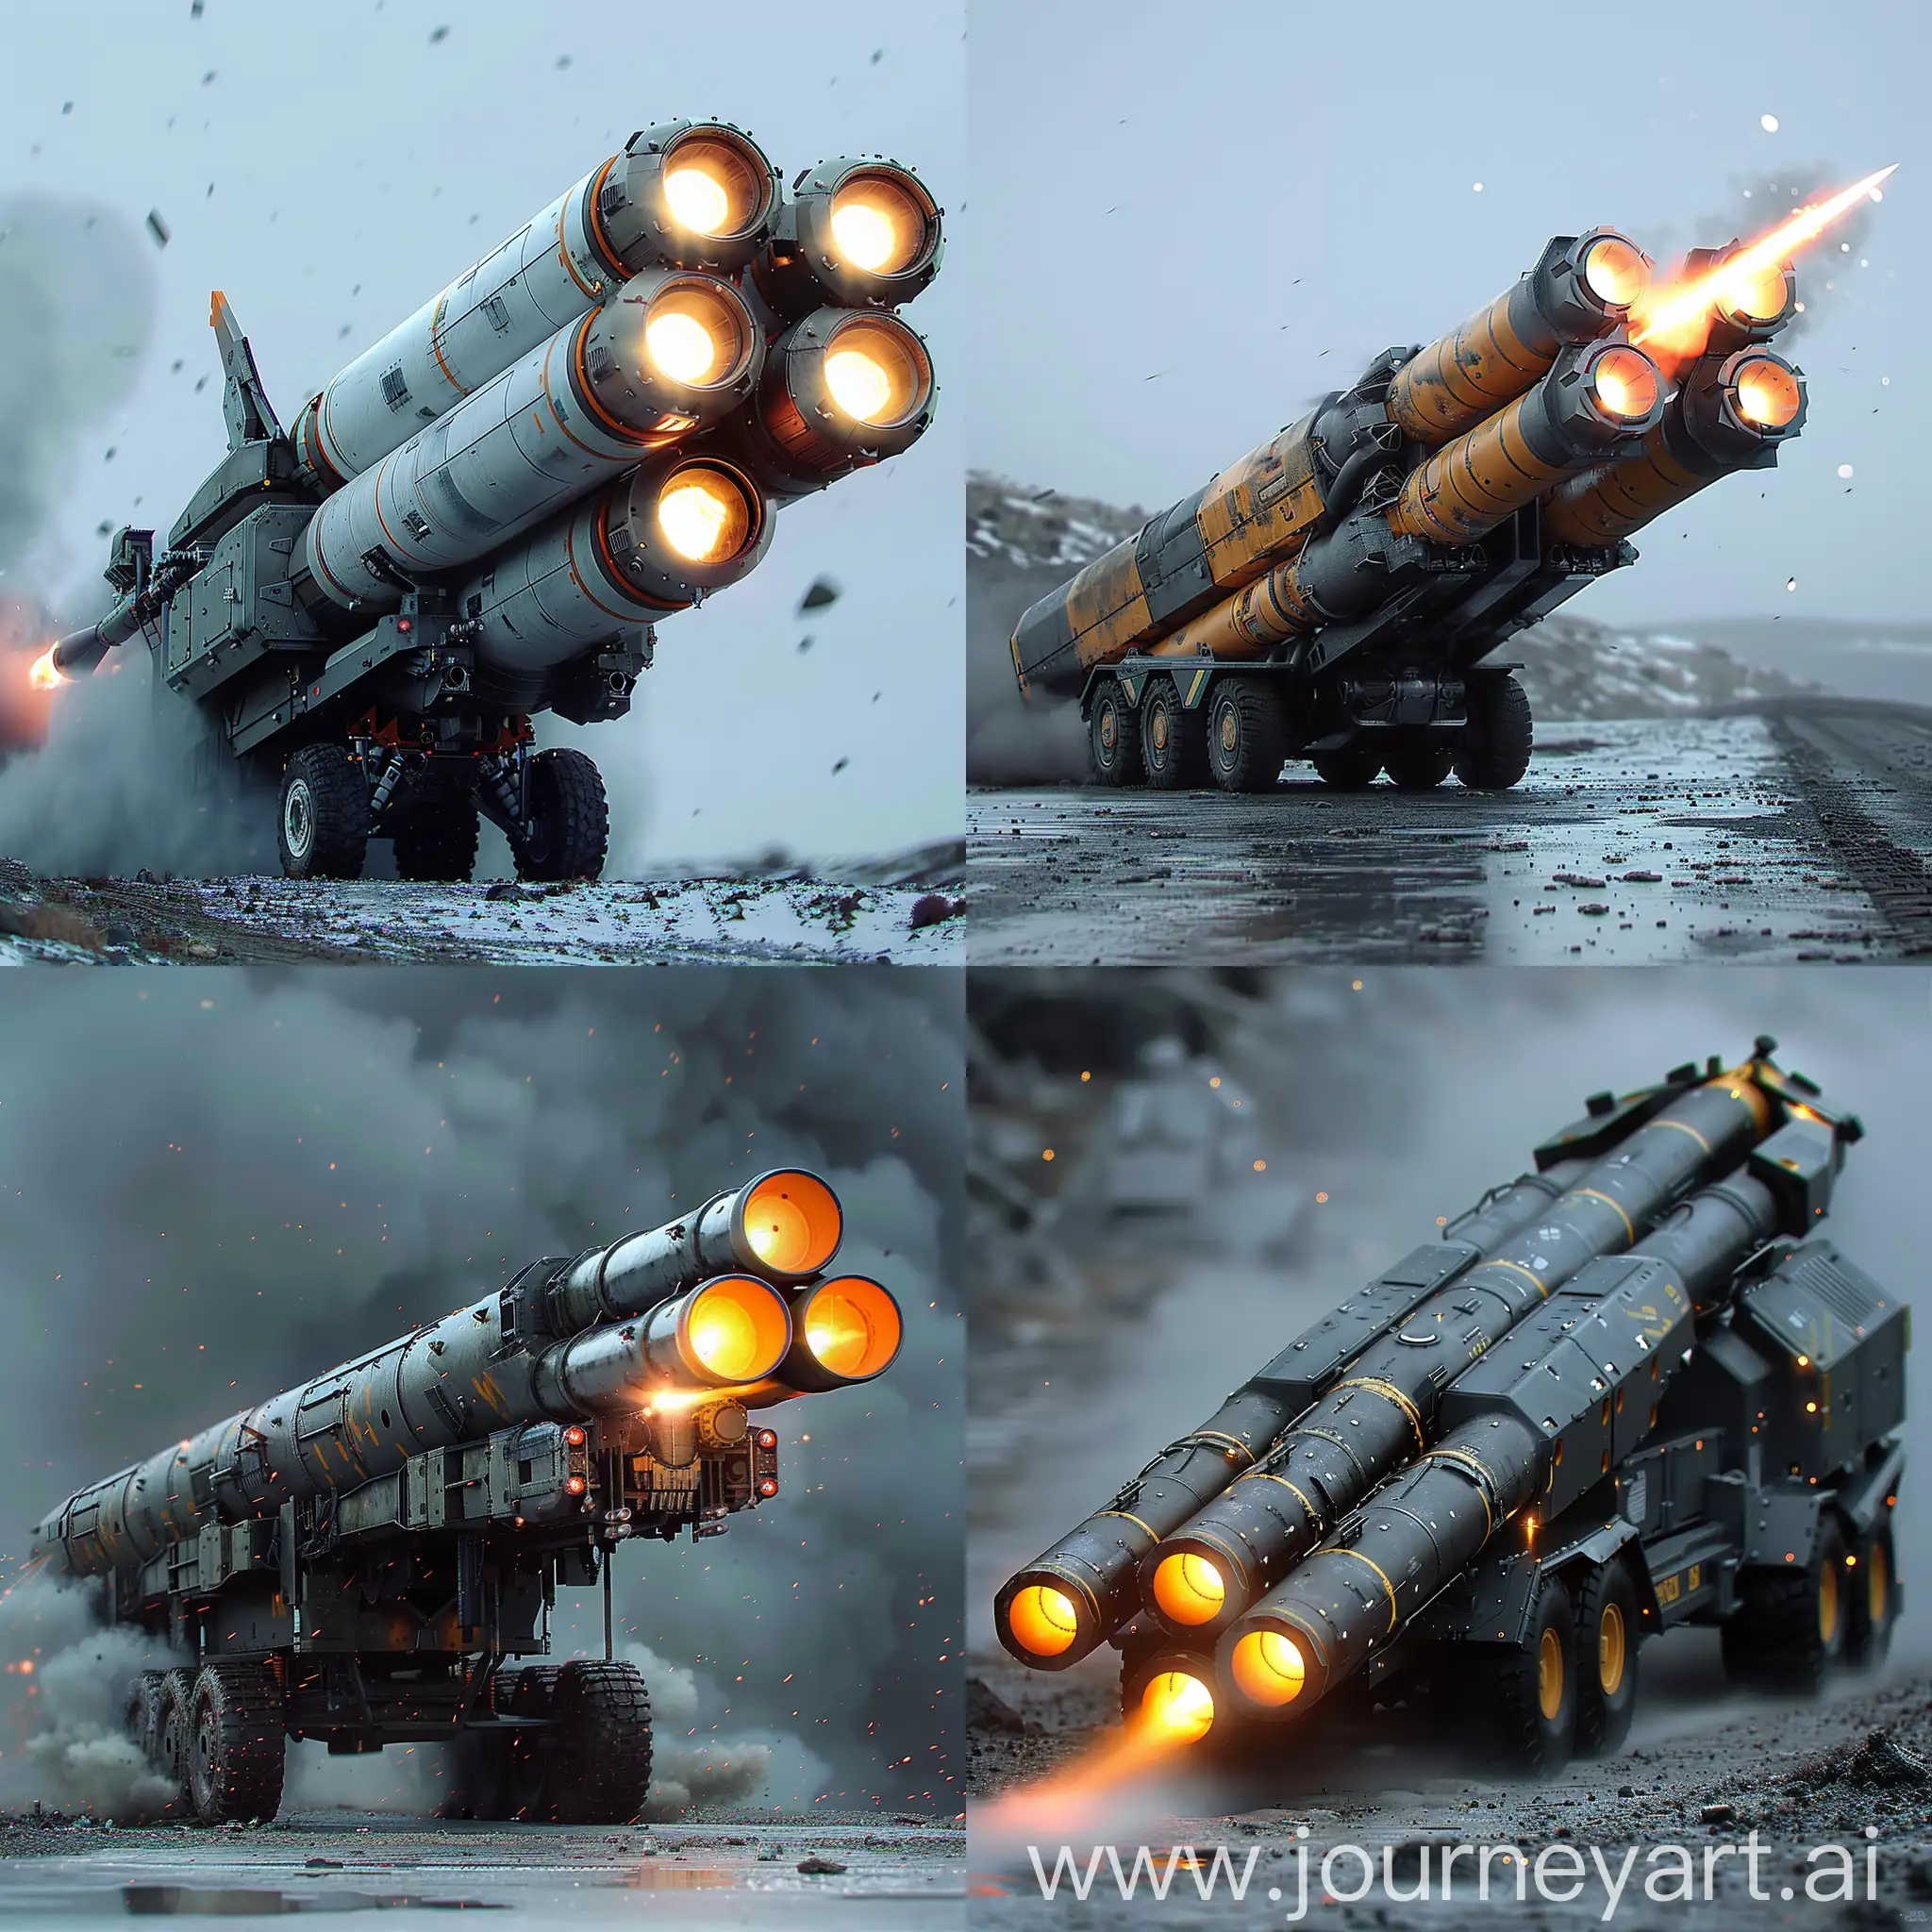 Futuristic multiple rocket launcher https://upload.wikimedia.org/wikipedia/commons/thumb/8/83/HIMARS_-_missile_launched.jpg/640px-HIMARS_-_missile_launched.jpg:: Advanced Targeting System, Modular Design, Long Range Capability, Rapid Fire Capability, Stealth Technology, Autonomous Operation, Reload Capability, Electronic Countermeasures, Adaptive Fire Control, Non-Line-of-Sight Capability, Quantum Targeting Matrix, Nano-Munition Integration Module, Warp Drive Rockets, Neural Interface Guidance System, Plasma Cannon Barrage, Holographic Decoy Projector, Gravity Well Stabilizers, Temporal Displacement Field, Quantum Entanglement Communication Network, Singularity Warhead Launcher, octane render --stylize 1000